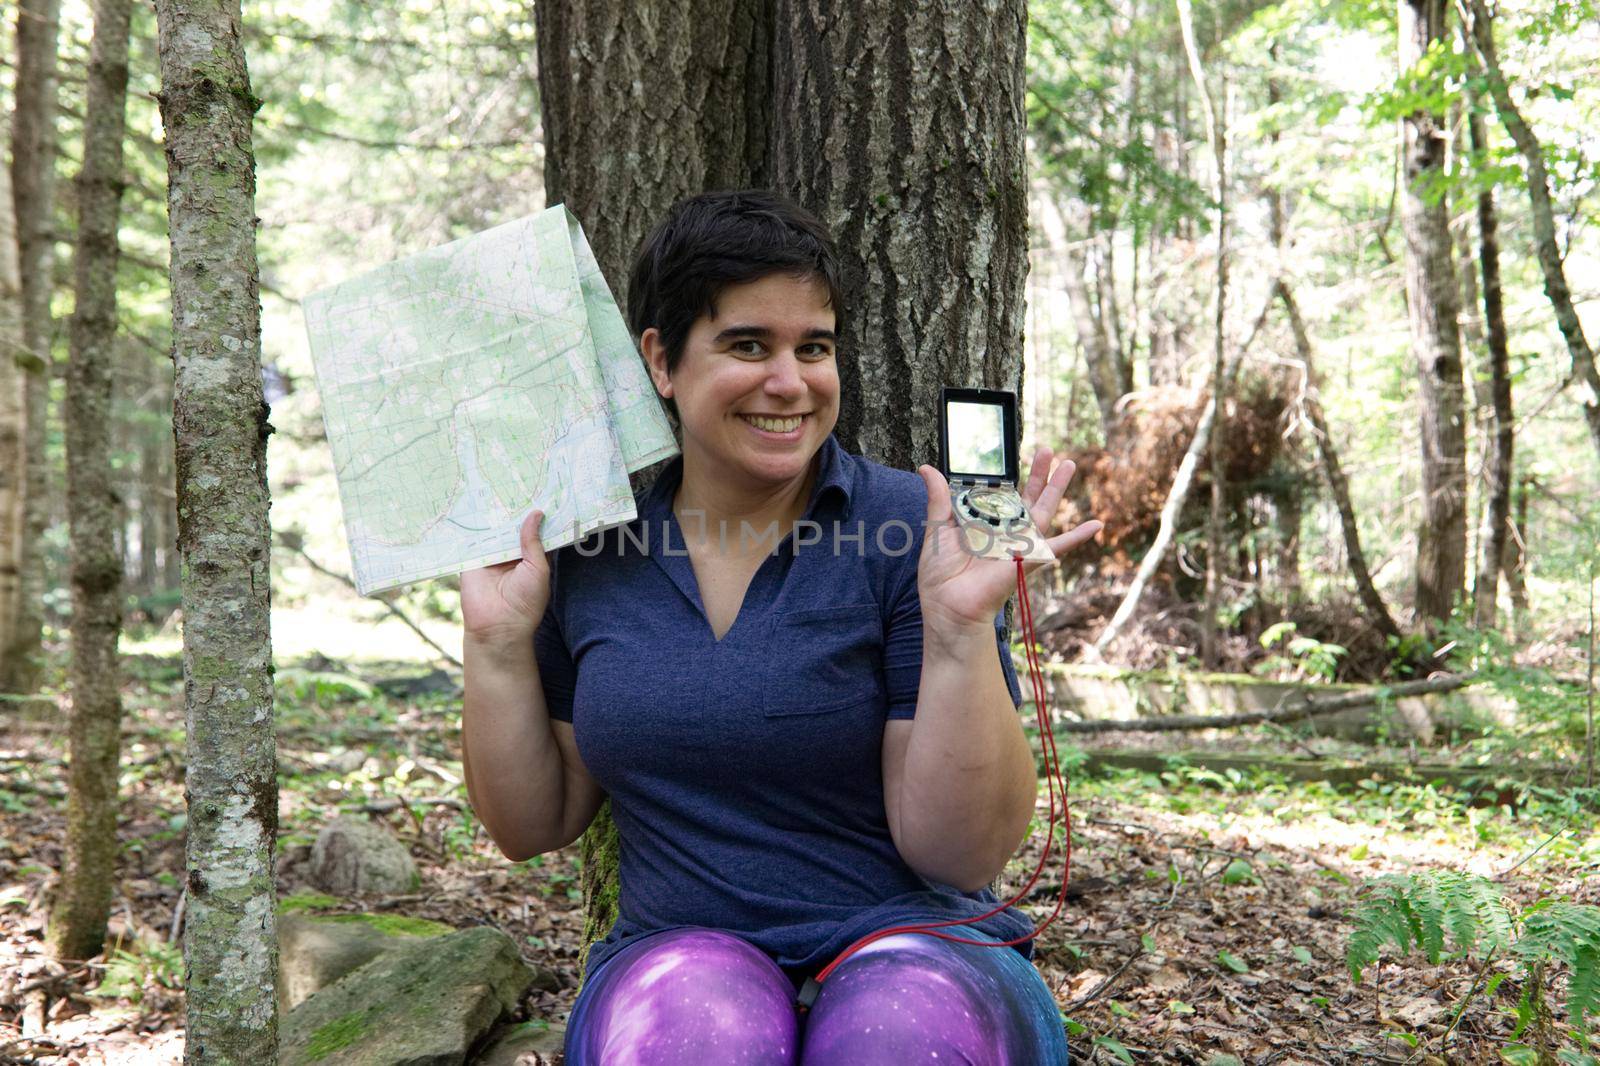 Woman in the forest smiles as she is prepared to navigate her way through the woods